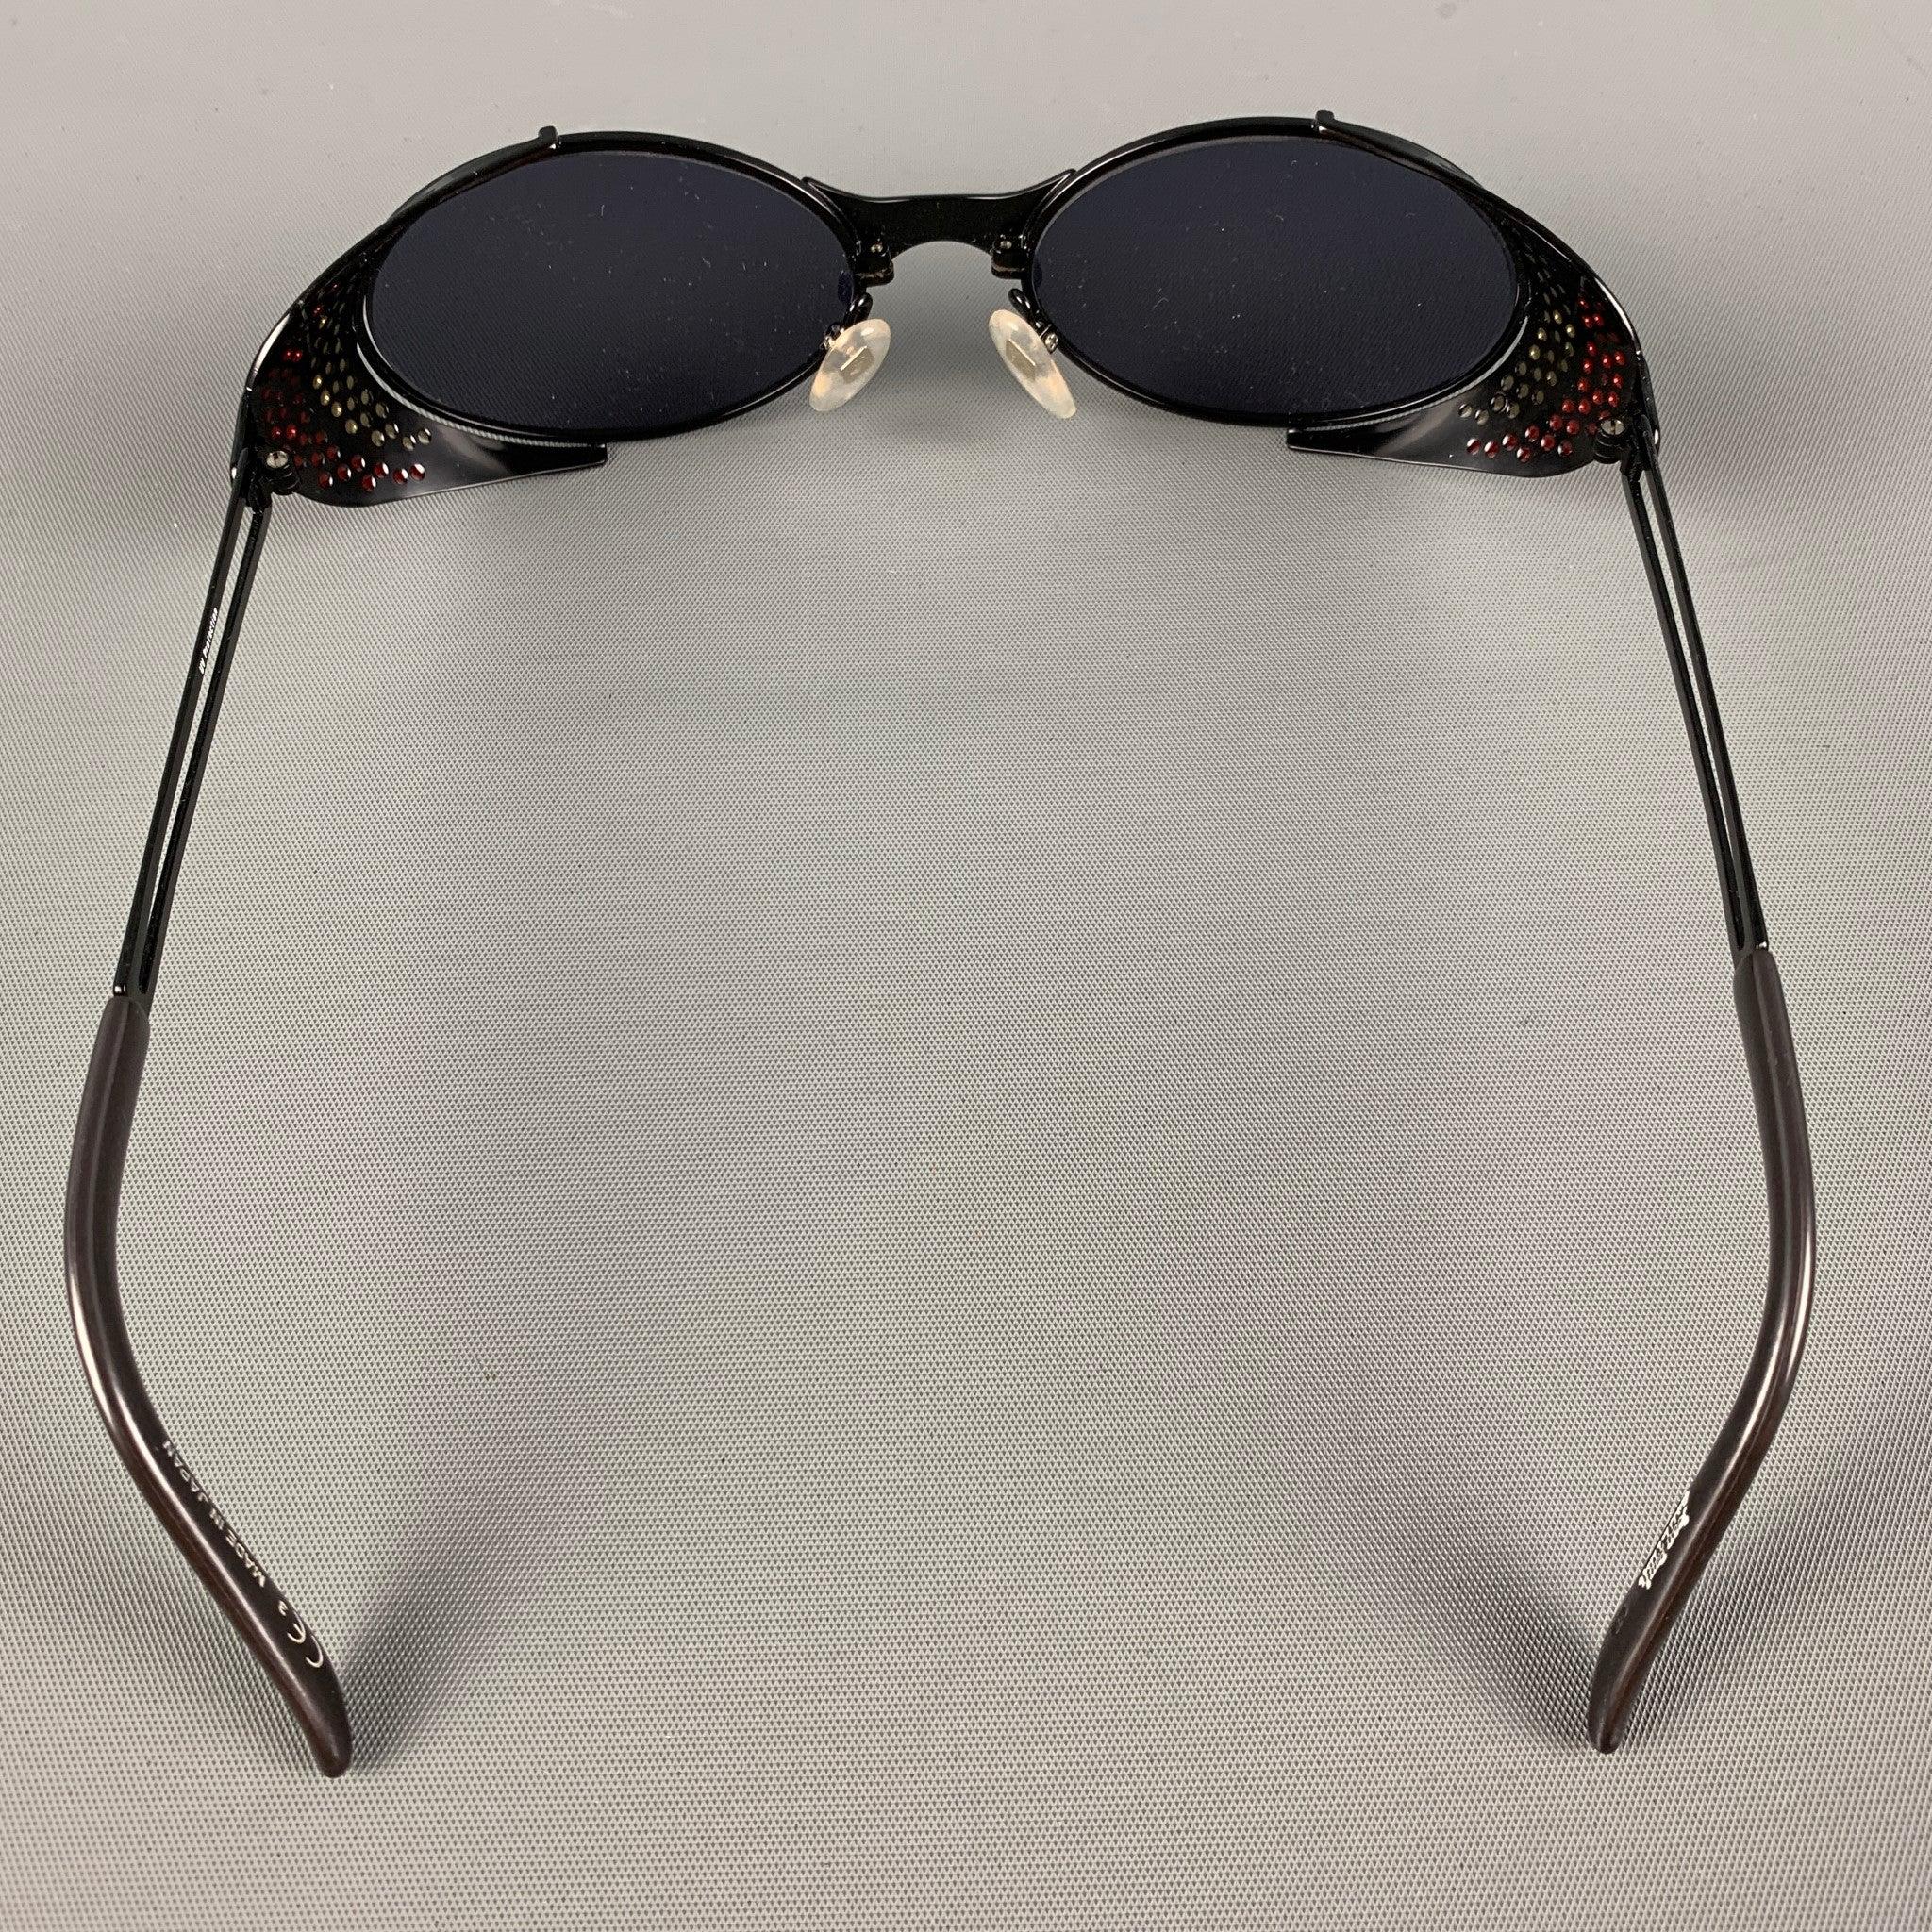 Vintage JEAN PAUL GAULTIER Black Red Metal Steampunk Sunglasses In Good Condition For Sale In San Francisco, CA